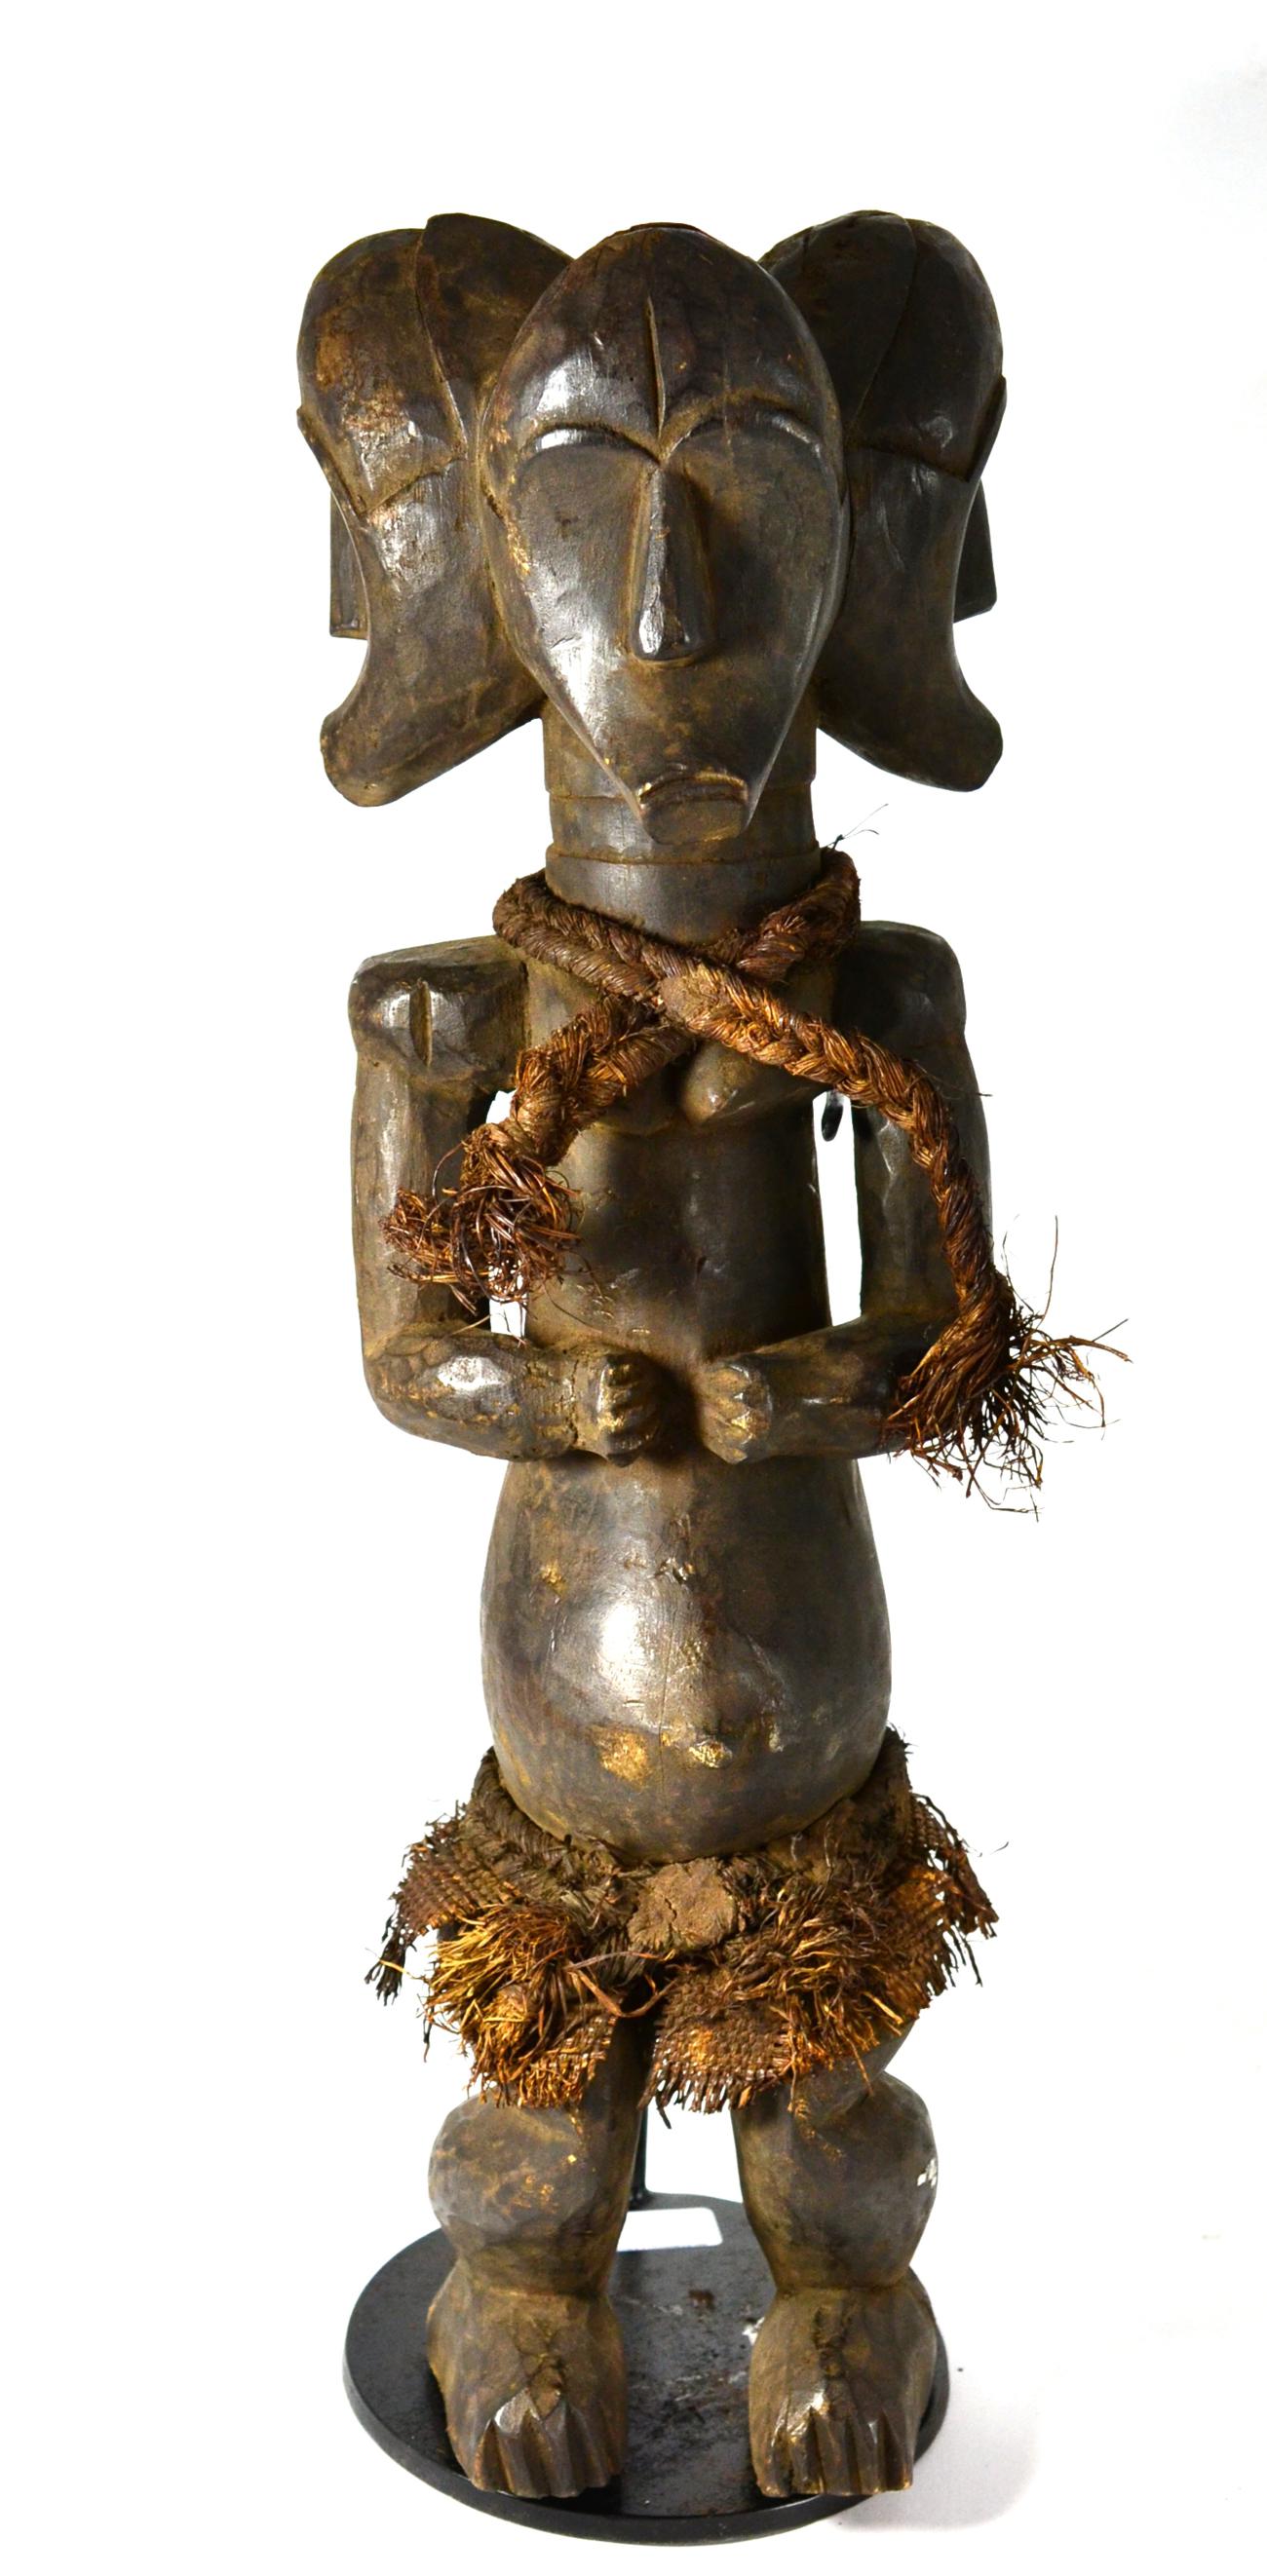 A Fang Triple Headed Maternity Figure, standing on half bent legs, her hands clasped above her